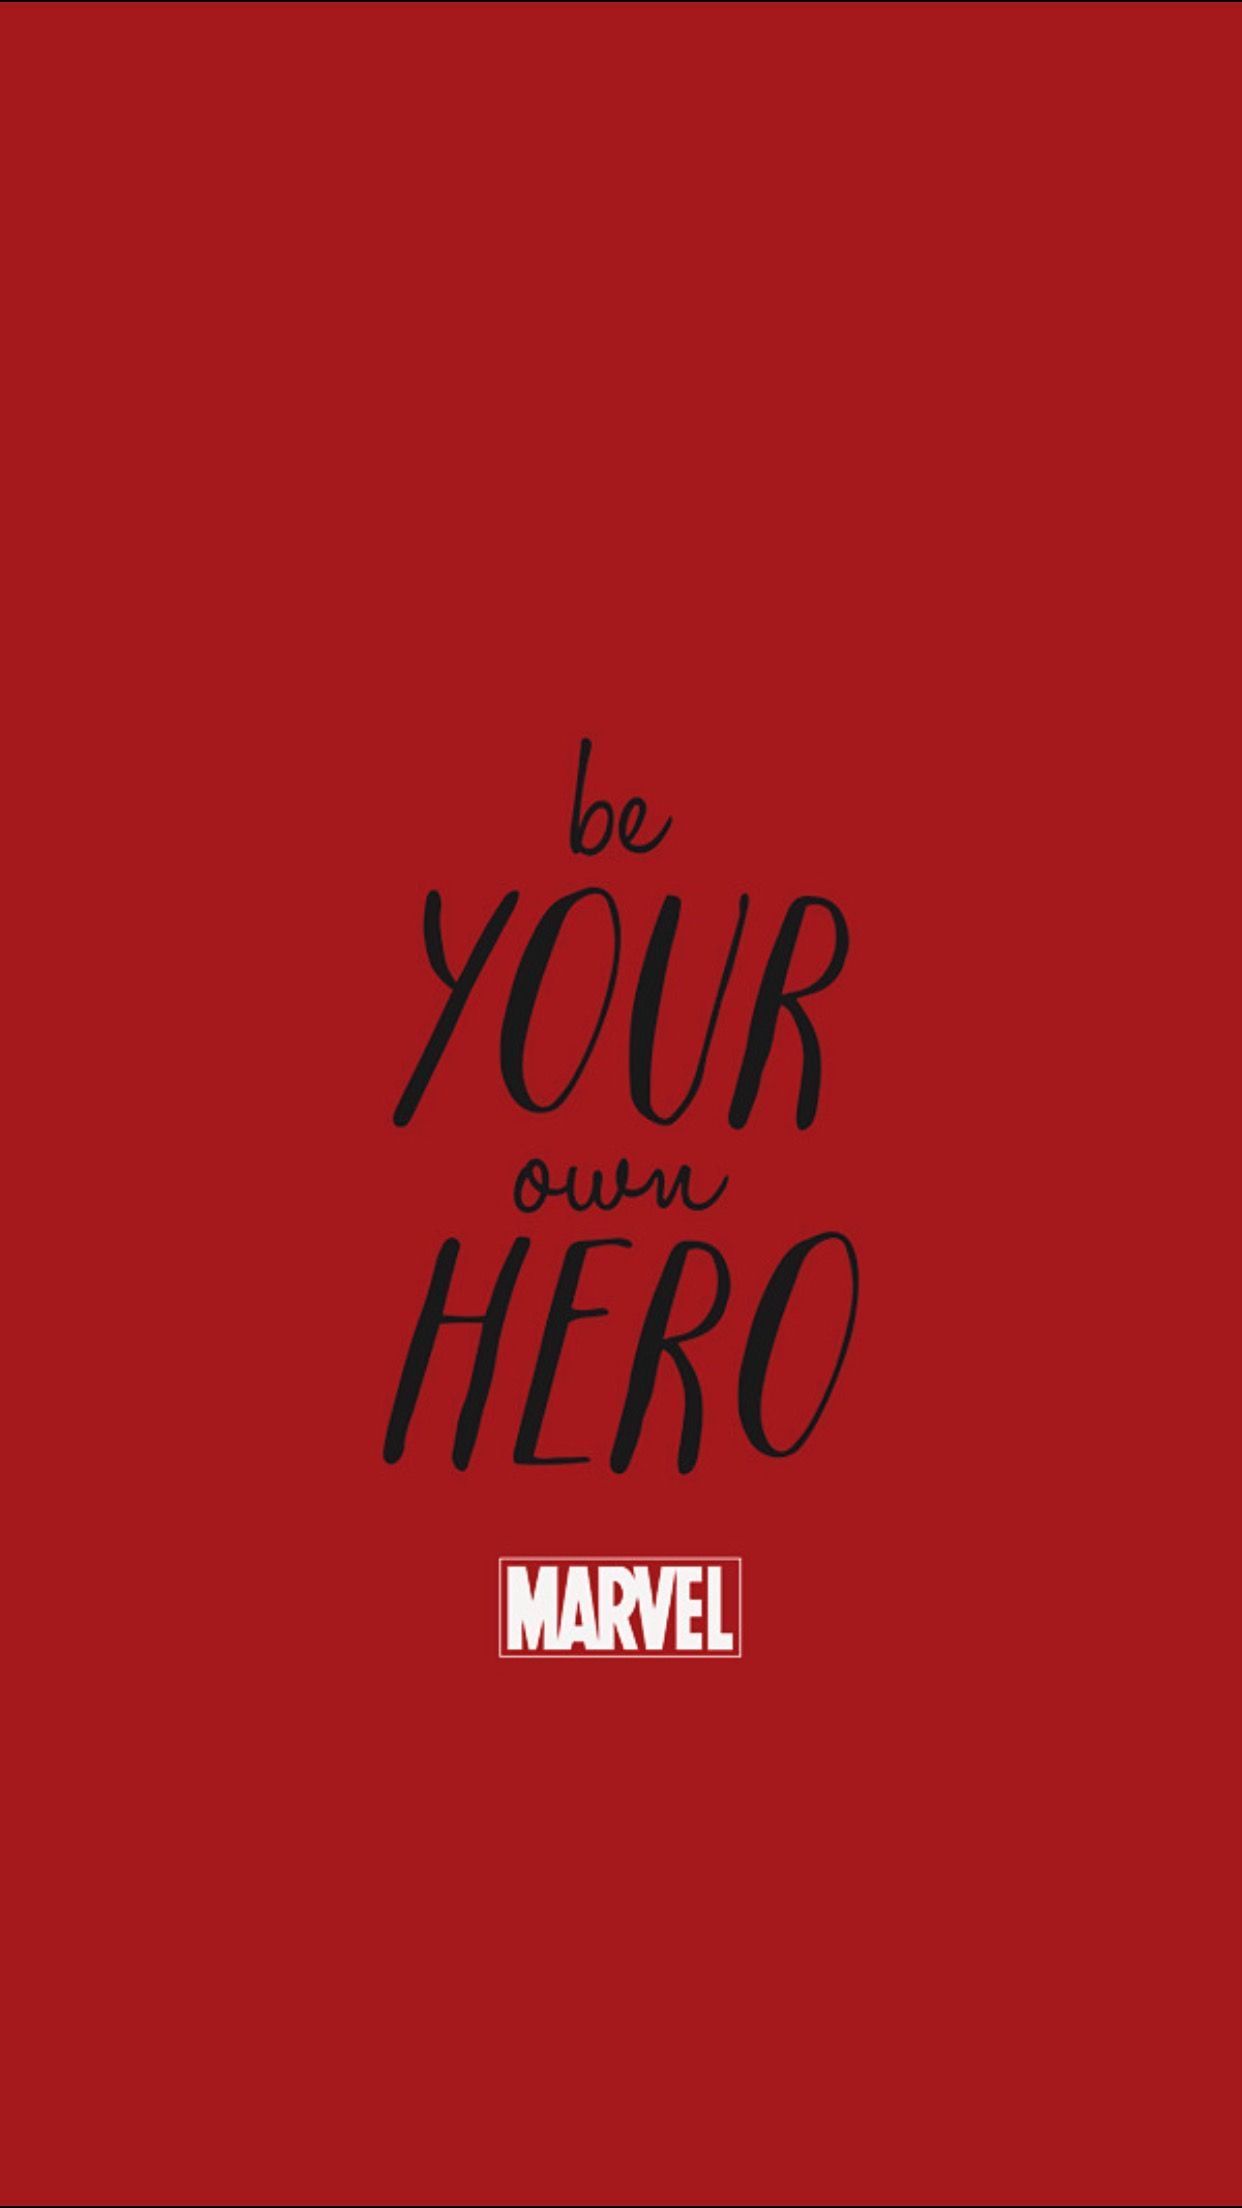 wall. Marvel quotes, Marvel background, Marvel movies